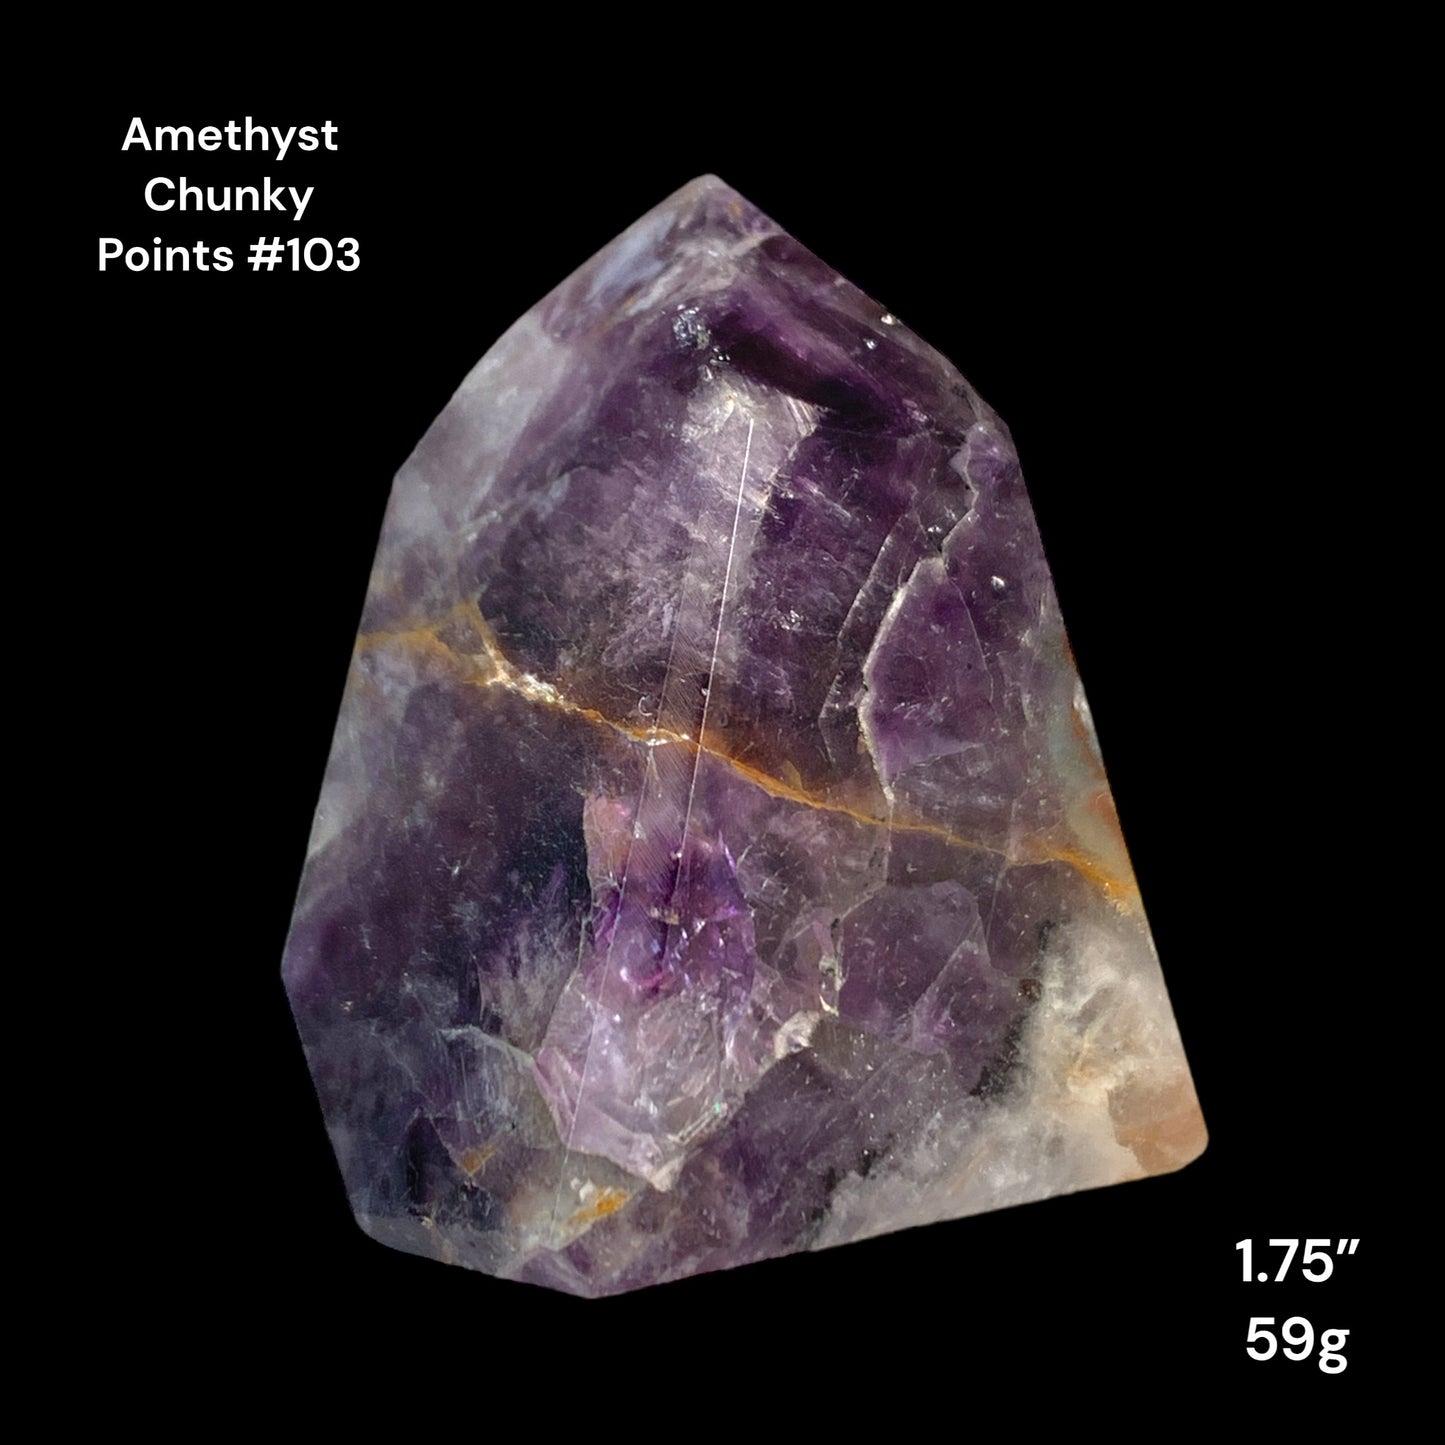 Amethyst Chunky Points - 1.75 inch - 69g - Polished Points